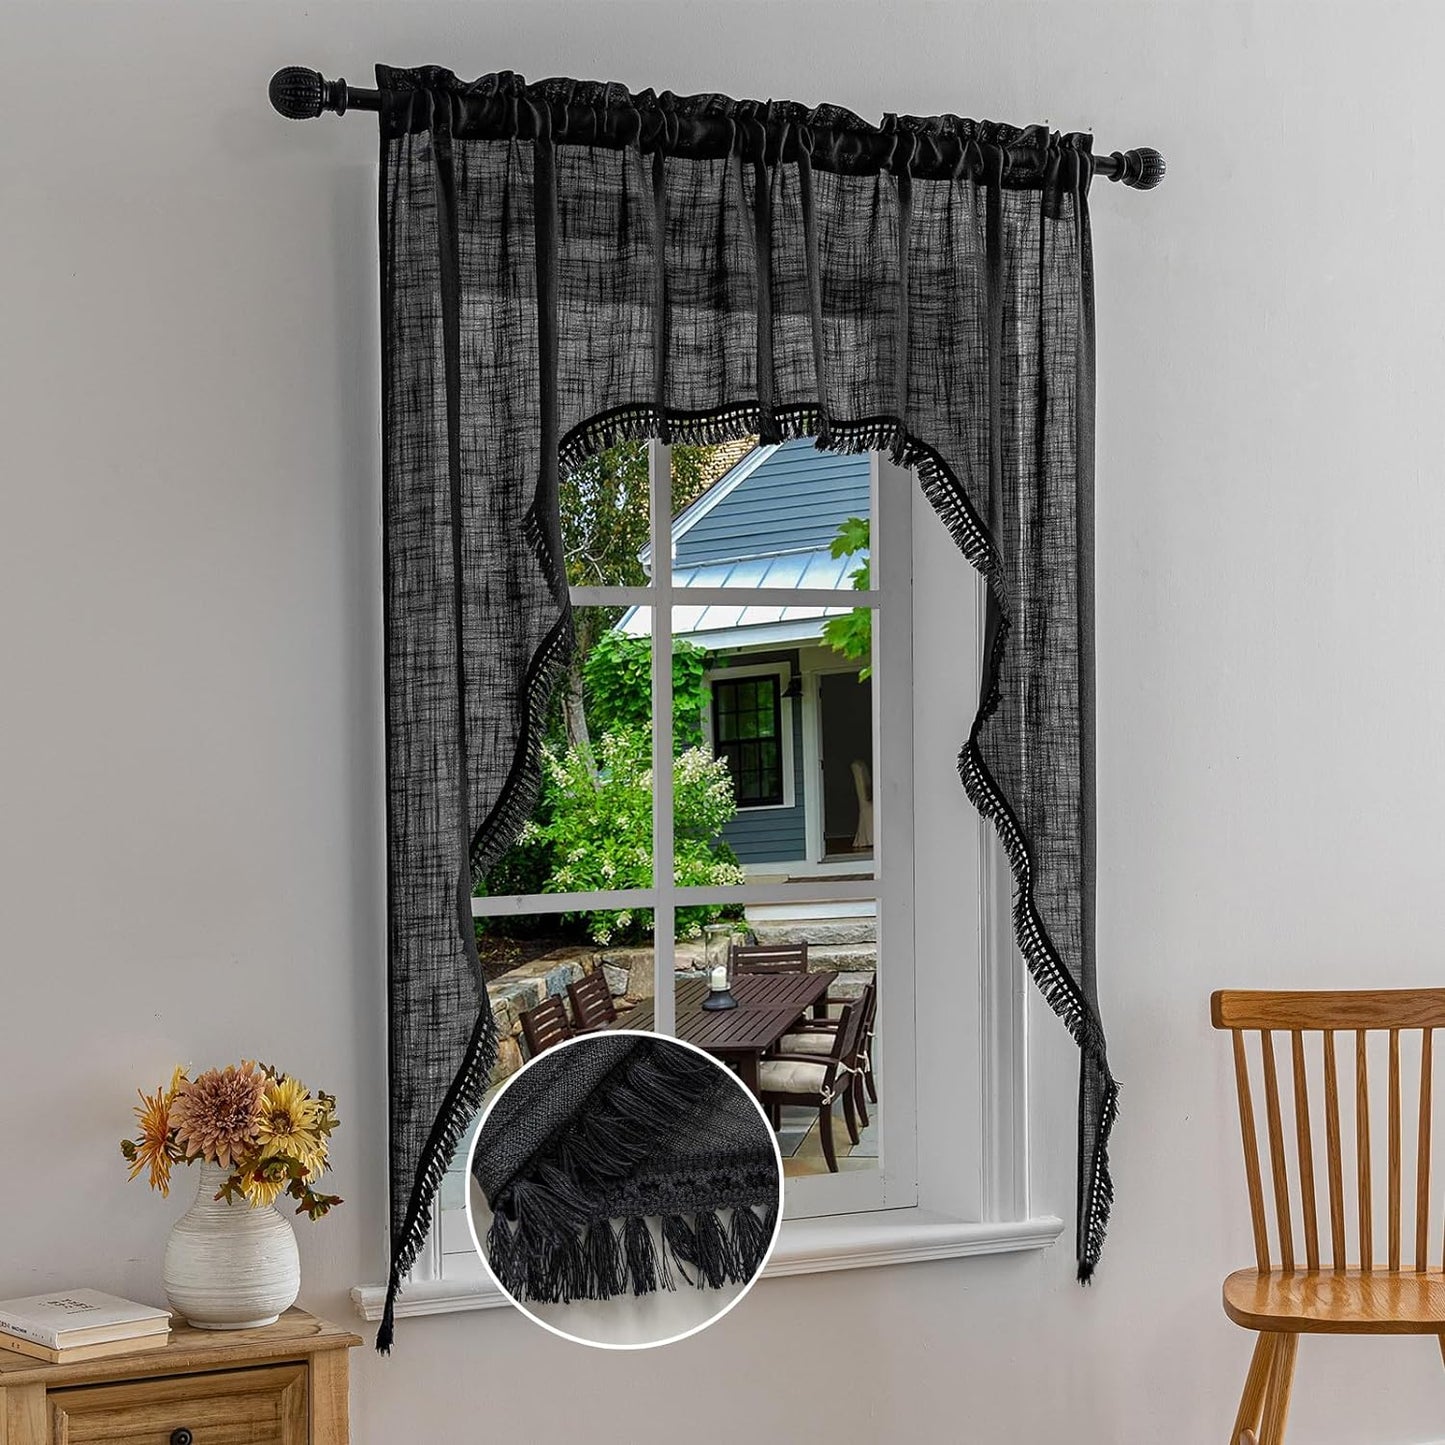 Beda Home Tassel Linen Textured Swag Curtain Valance for Farmhouses’ Kitchen; Light Filtering Rustic Short Swag Topper for Small Windows Bedroom Privacy Added Rod Pocket Design(Nature 36X63-2Pcs)  BD BEDA HOME Black 36Wx63L - 2 Panels 